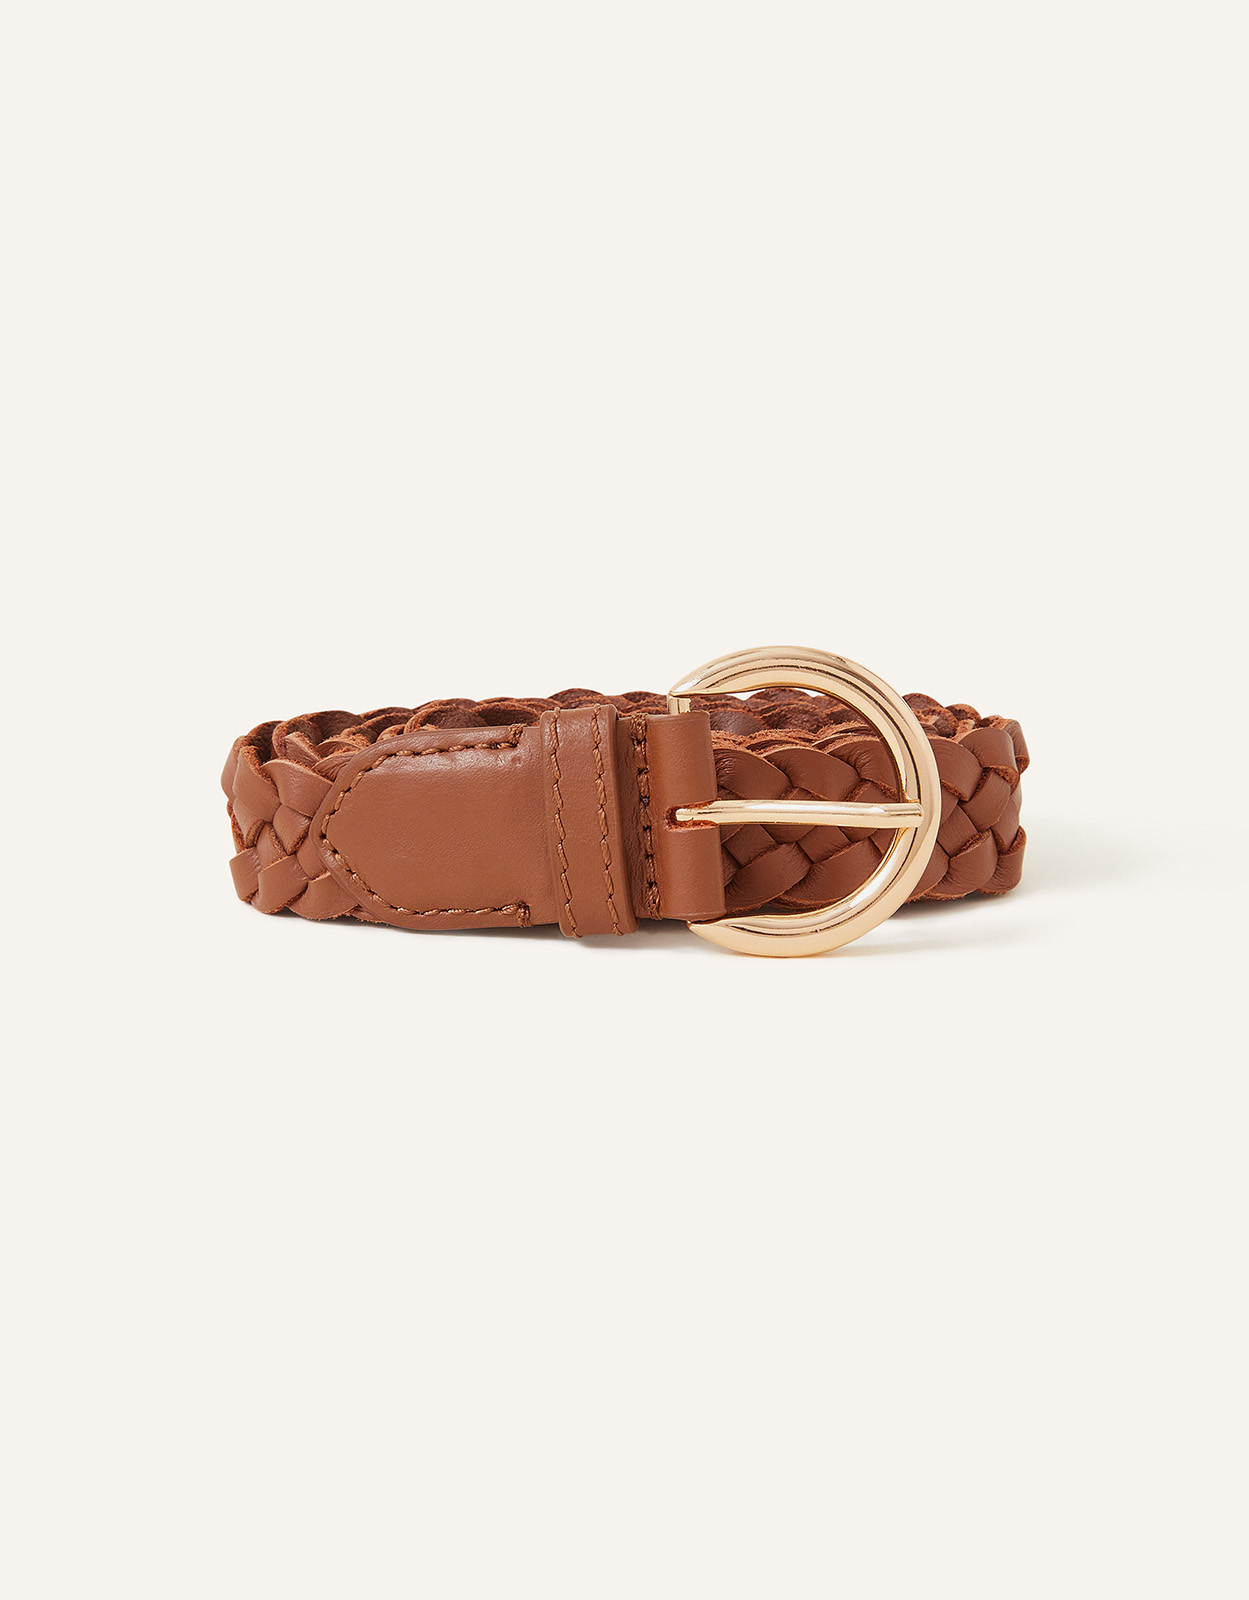 Accessorize Women's Leather Plaited Belt Tan, Size: One Size